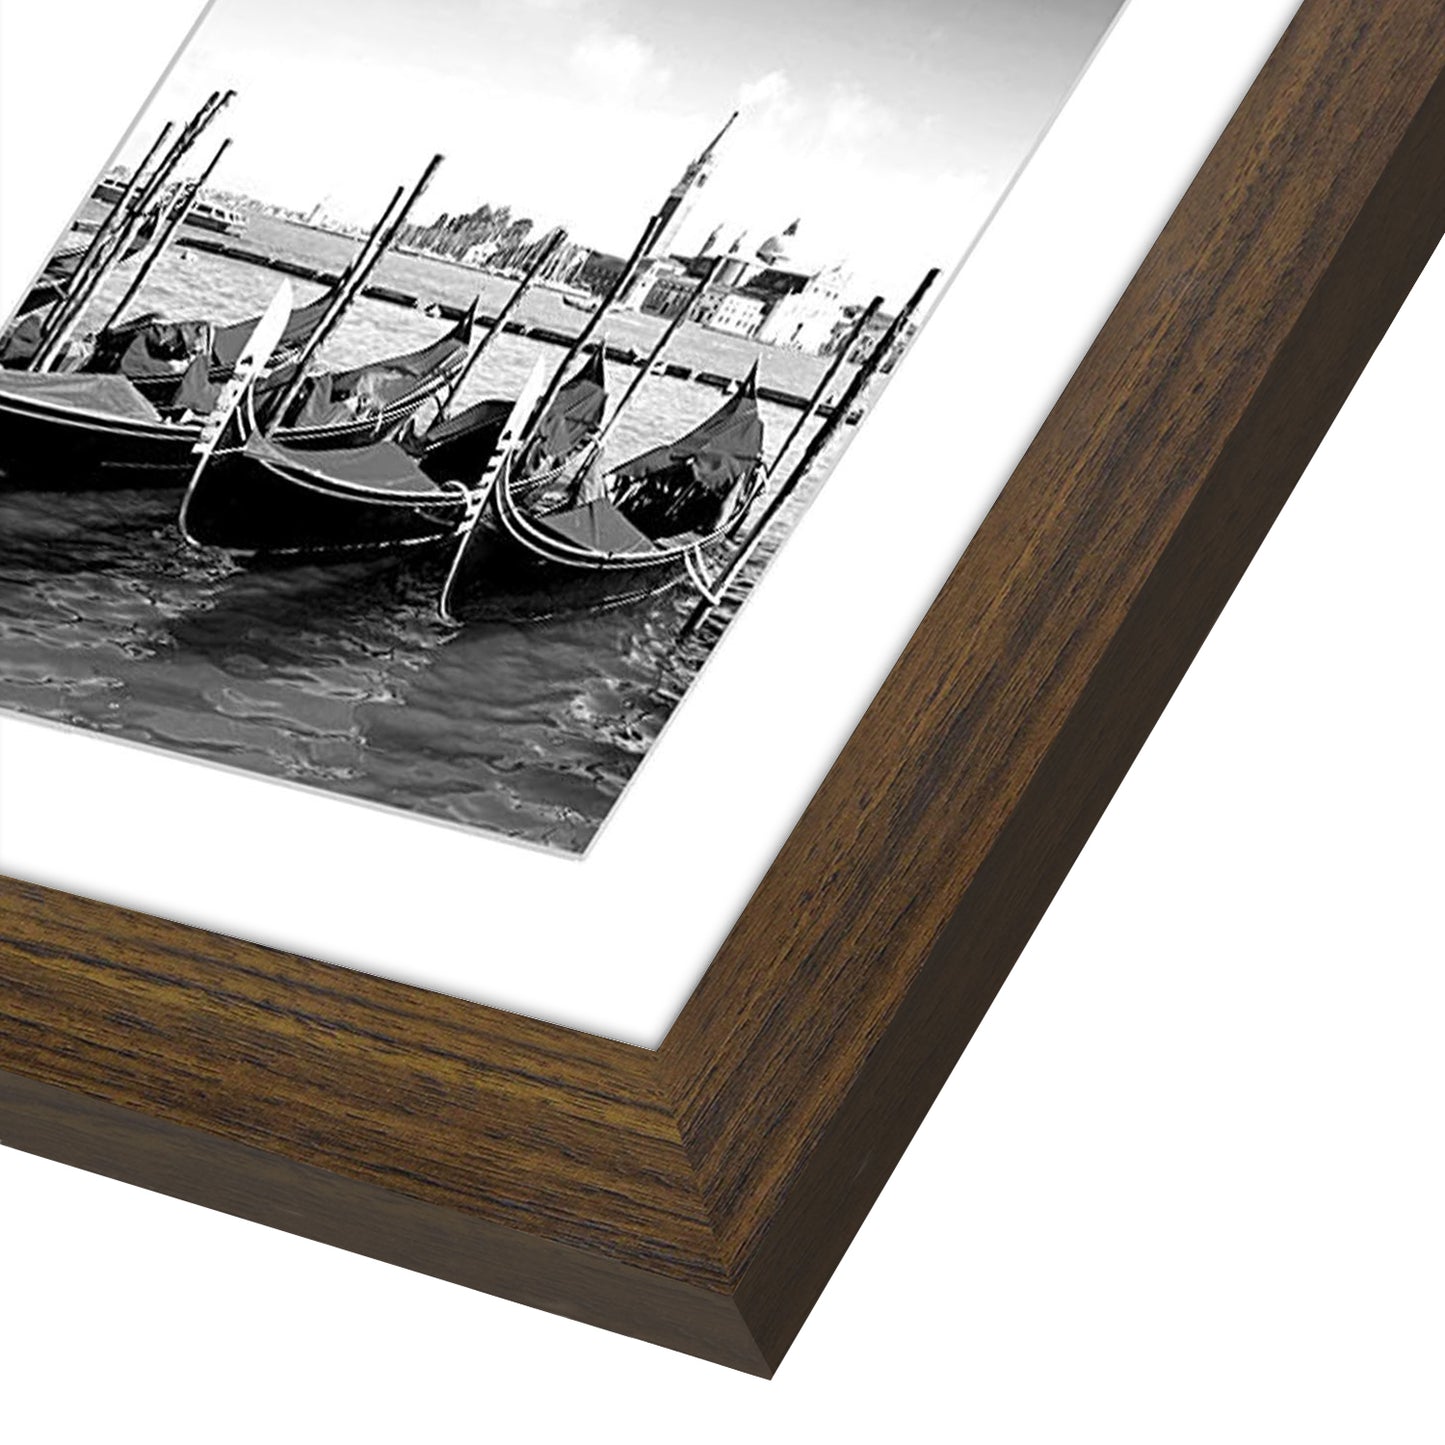 4-Photo Collage Picture Frame for 4x6 or 4x4 | Choose Size and Color